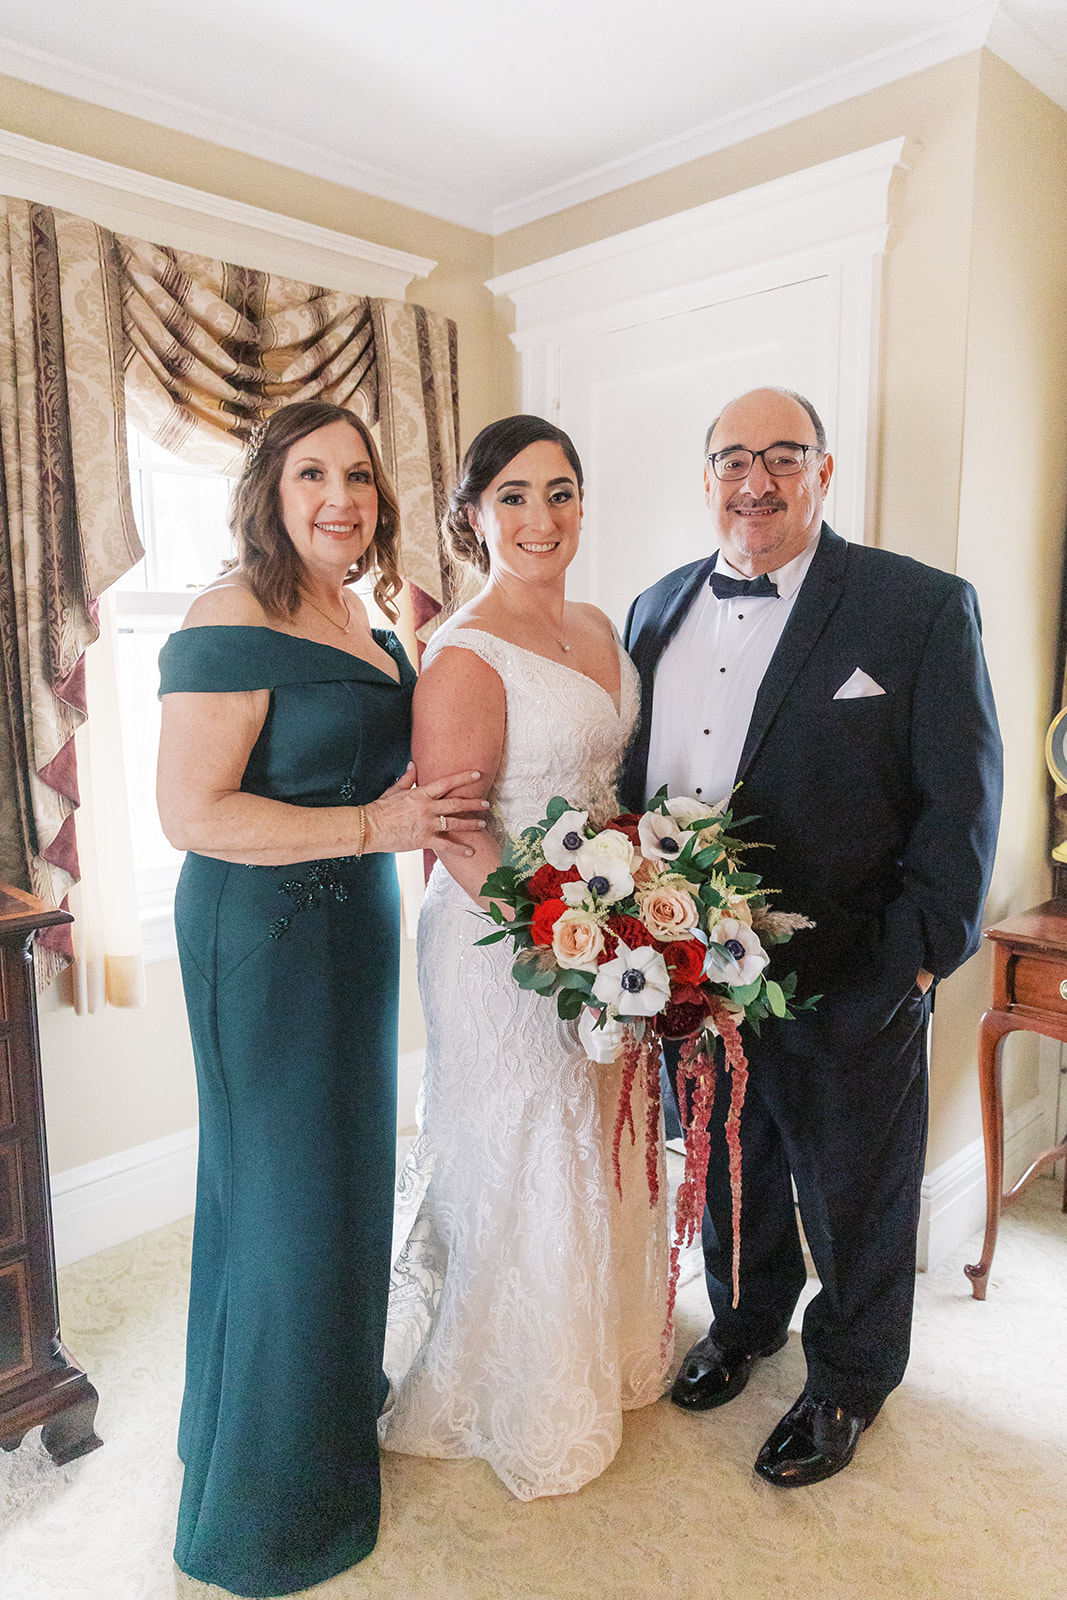 A bride stands with mom and dad in the getting ready room